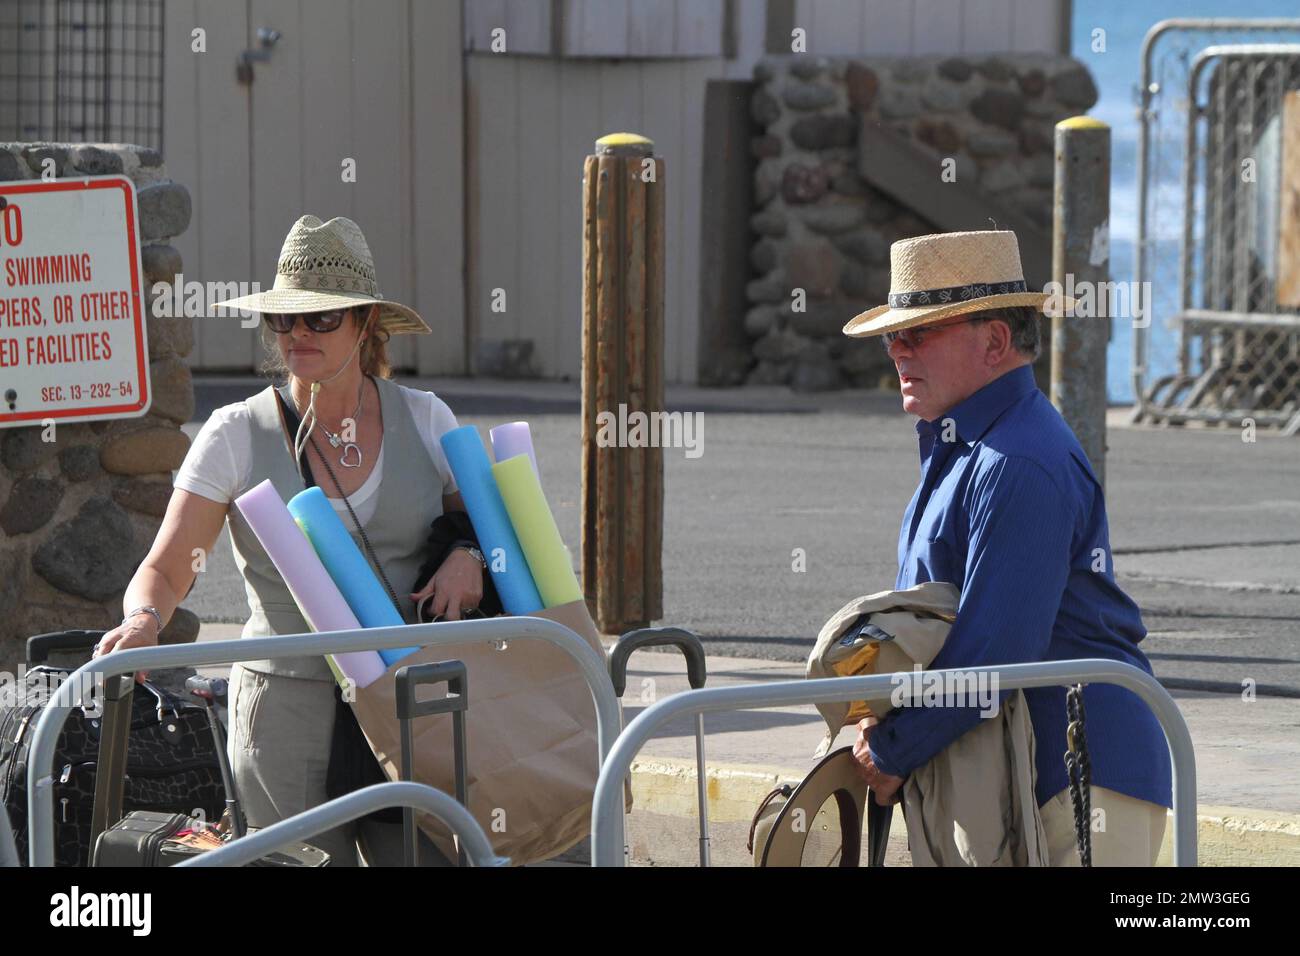 EXCLUSIVE!! Actor William Shatner and wife Elizabeth Martin are seen boarding a boat whilst on holiday in Hawaii.   The star worldly recognized as Captain Kirk of the 'Star Trek' series, tried to stay incognito under a Panama hat whilst boarding the boat with luggage and a bag full of water noodles.  Shatner, 80, is reportedly headed to Broadway again.  His one man show, 'Shatner's World: We Just Live In It' will debut in February 2012 for a brief run at the Music Box Theatre on Broadway. The show which Shatner wrote himself, will kick off a 15-week national tour and is based on the years of f Stock Photo